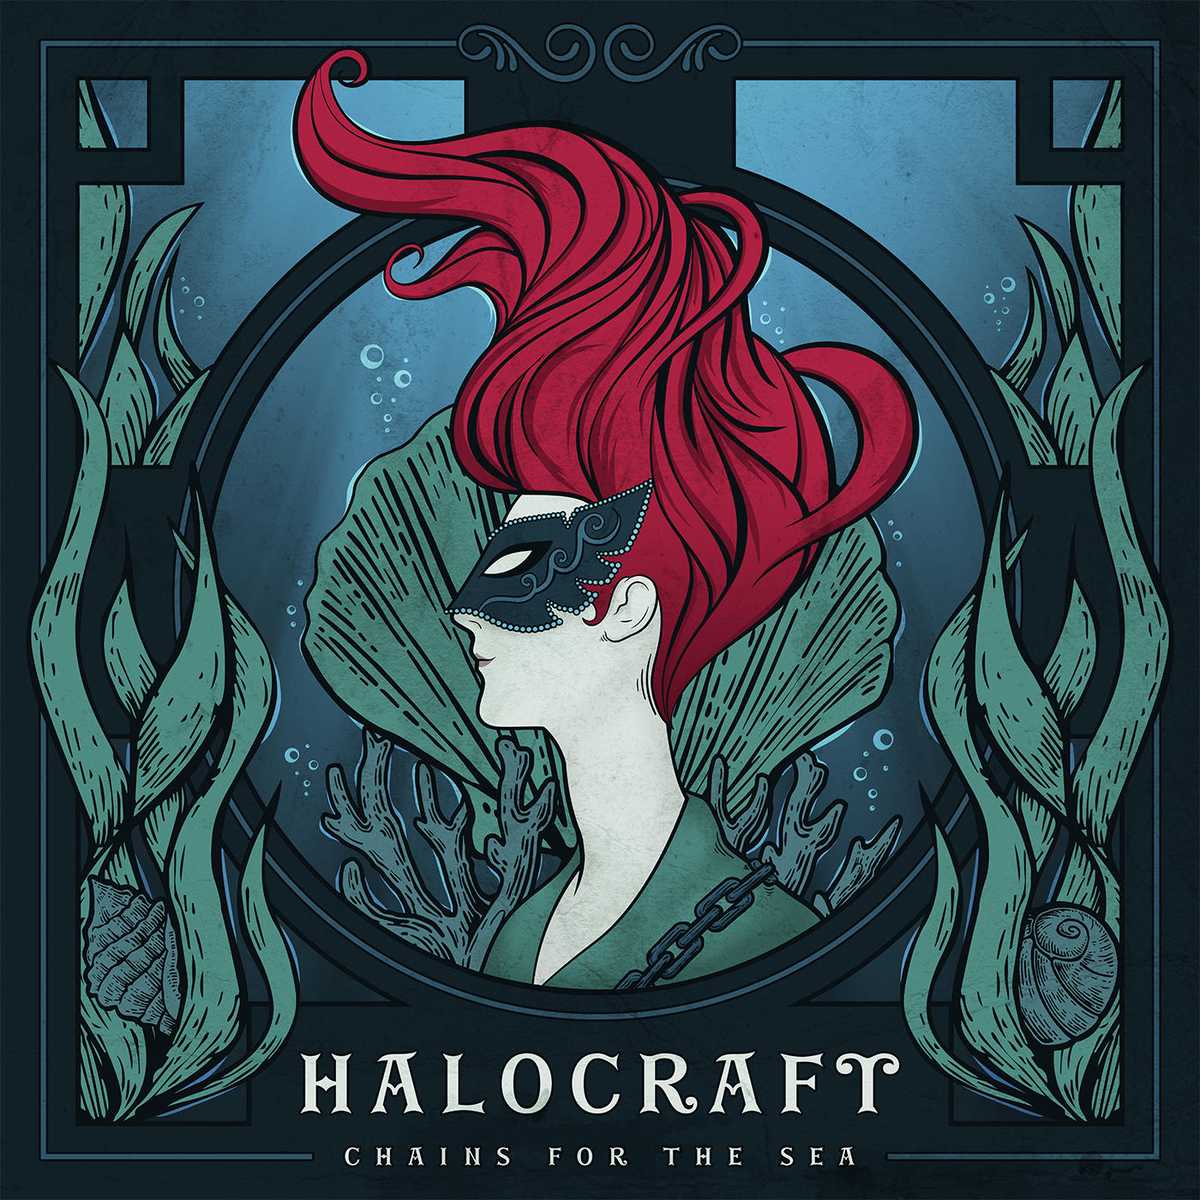 Halocraft - chains for the sea